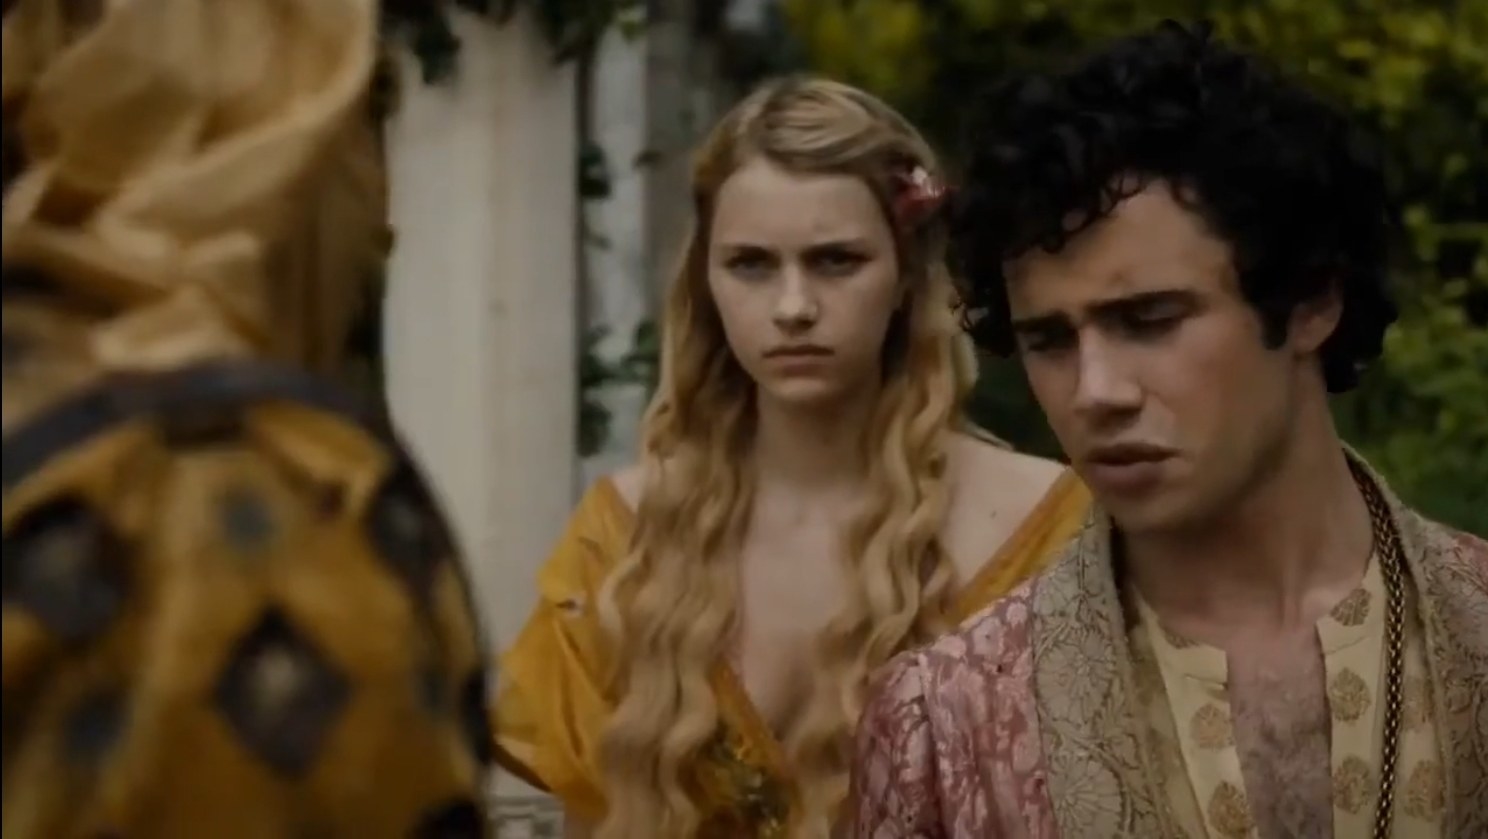 Nell Tiger Free as Myrcella Baratheon in &quot;Game of Thrones&quot;